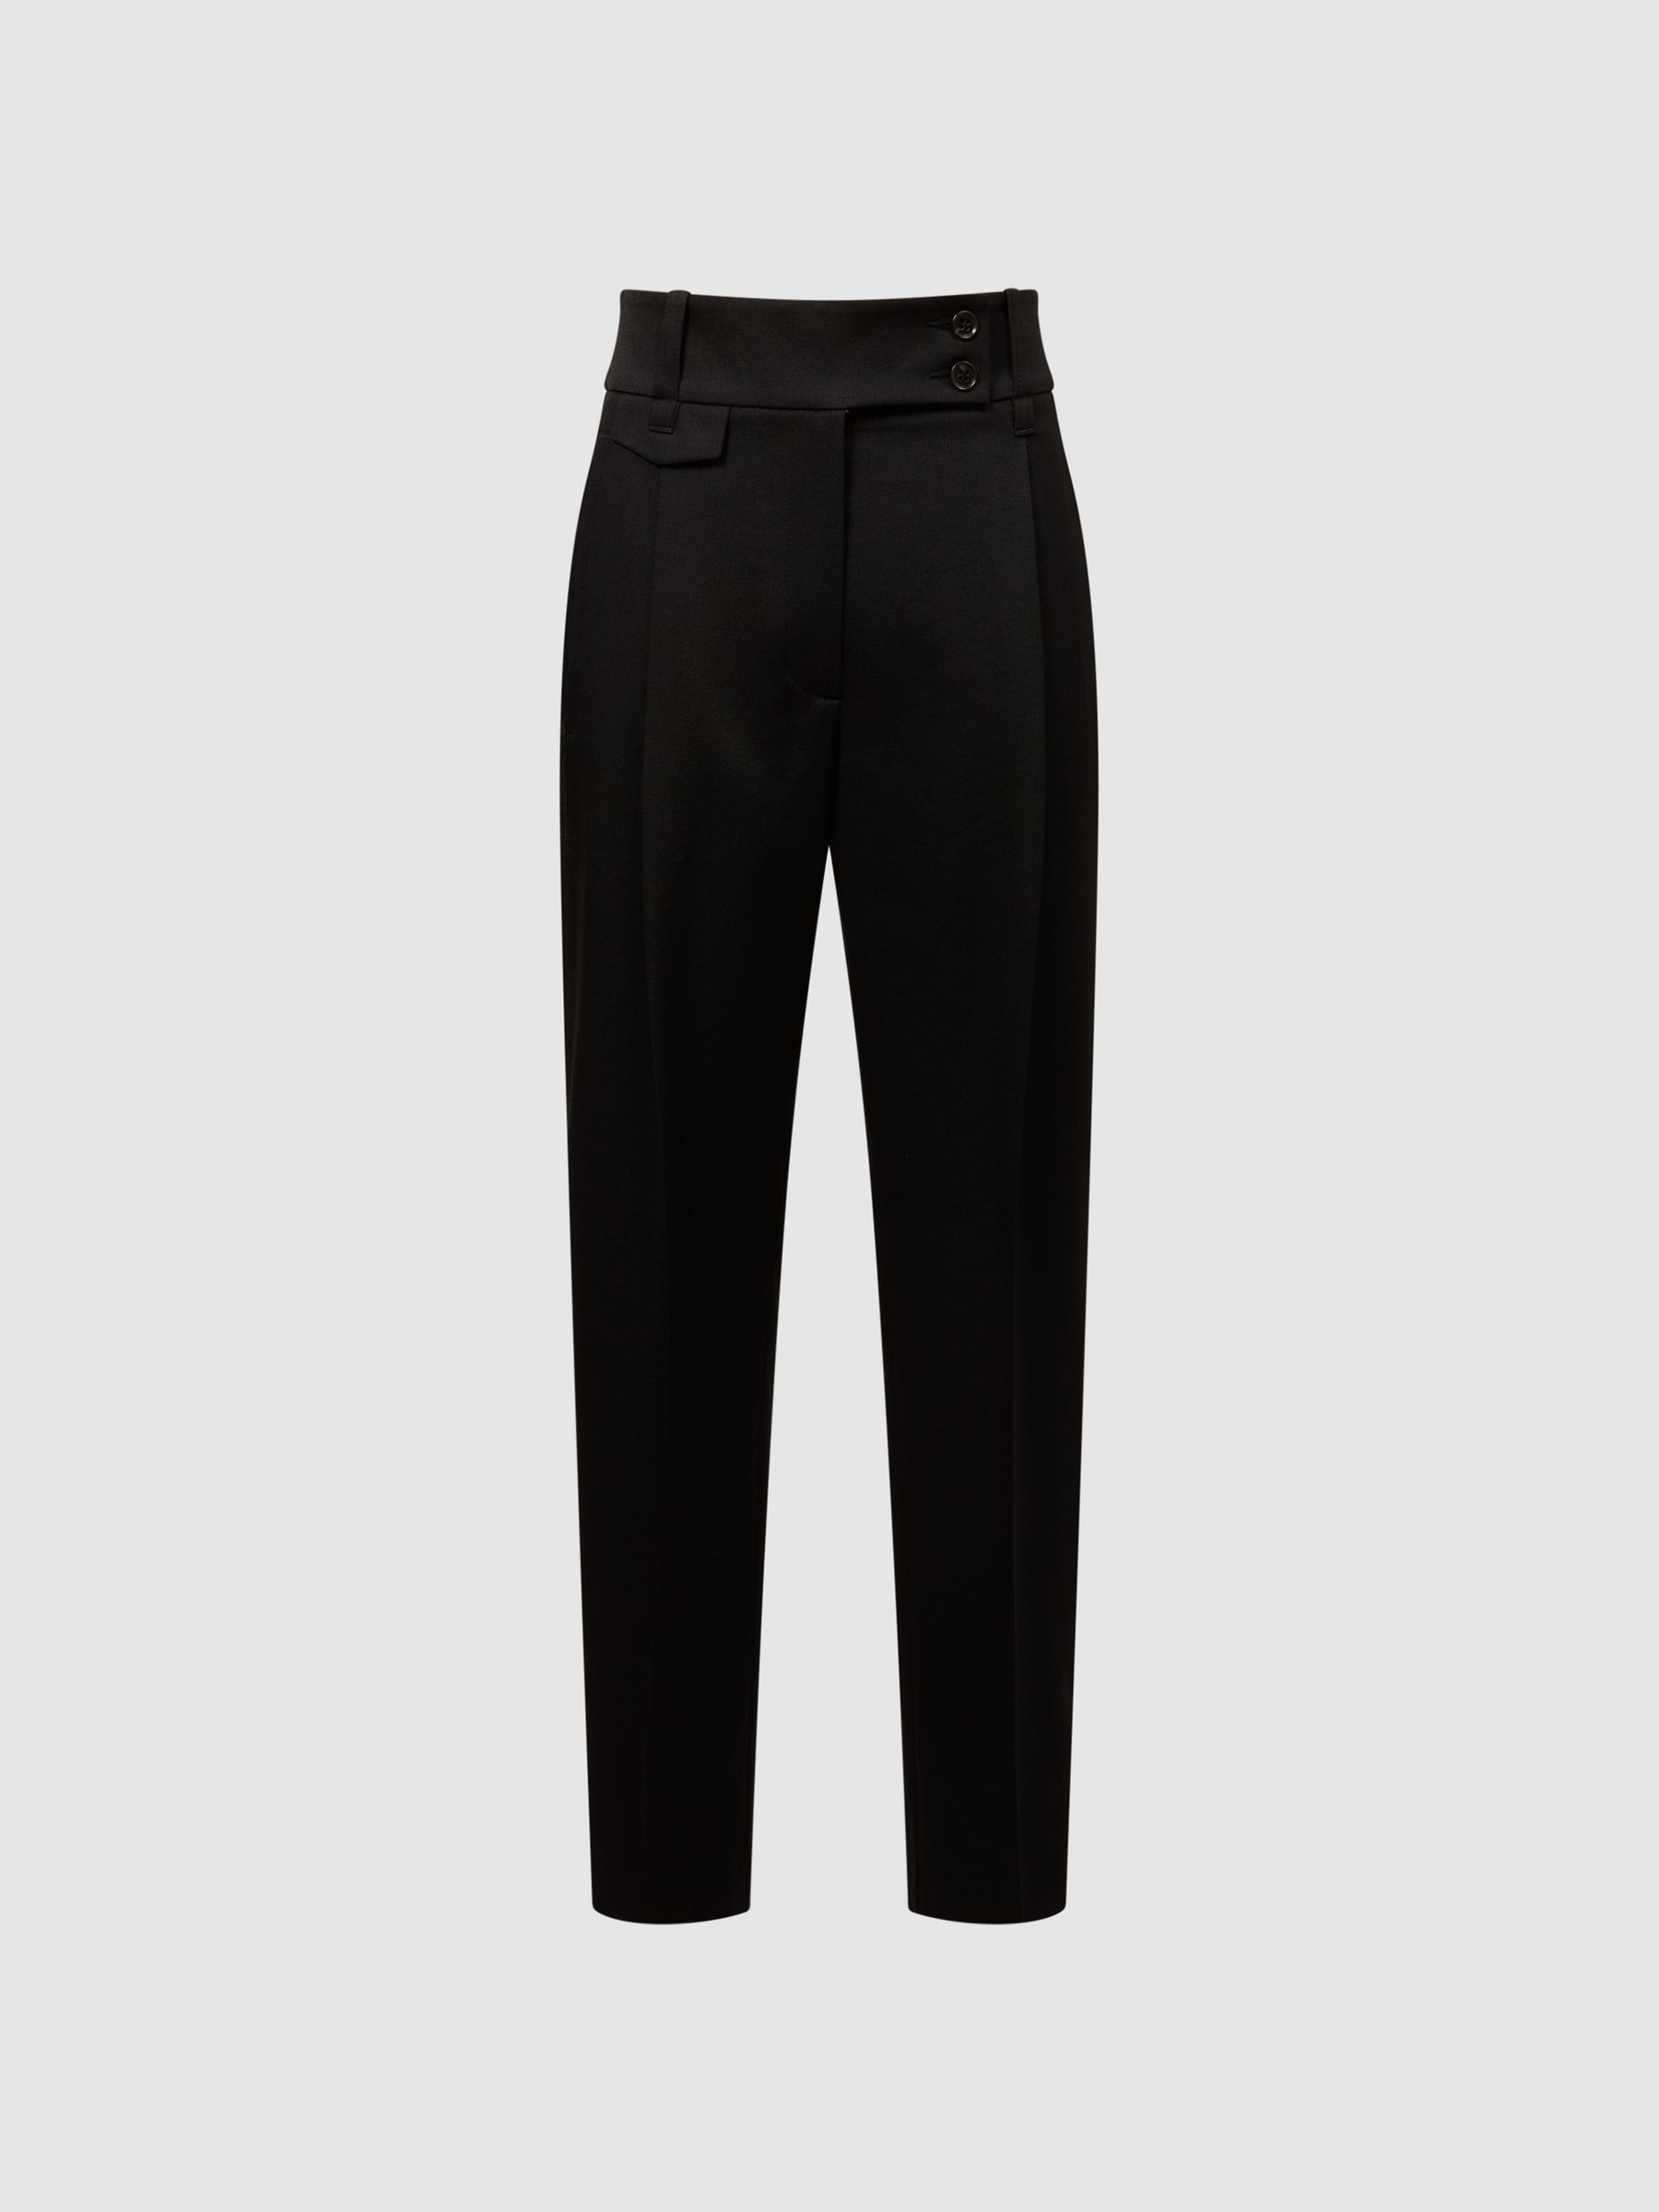 Reiss River High Rise Cropped Tapered Trousers | REISS Ireland